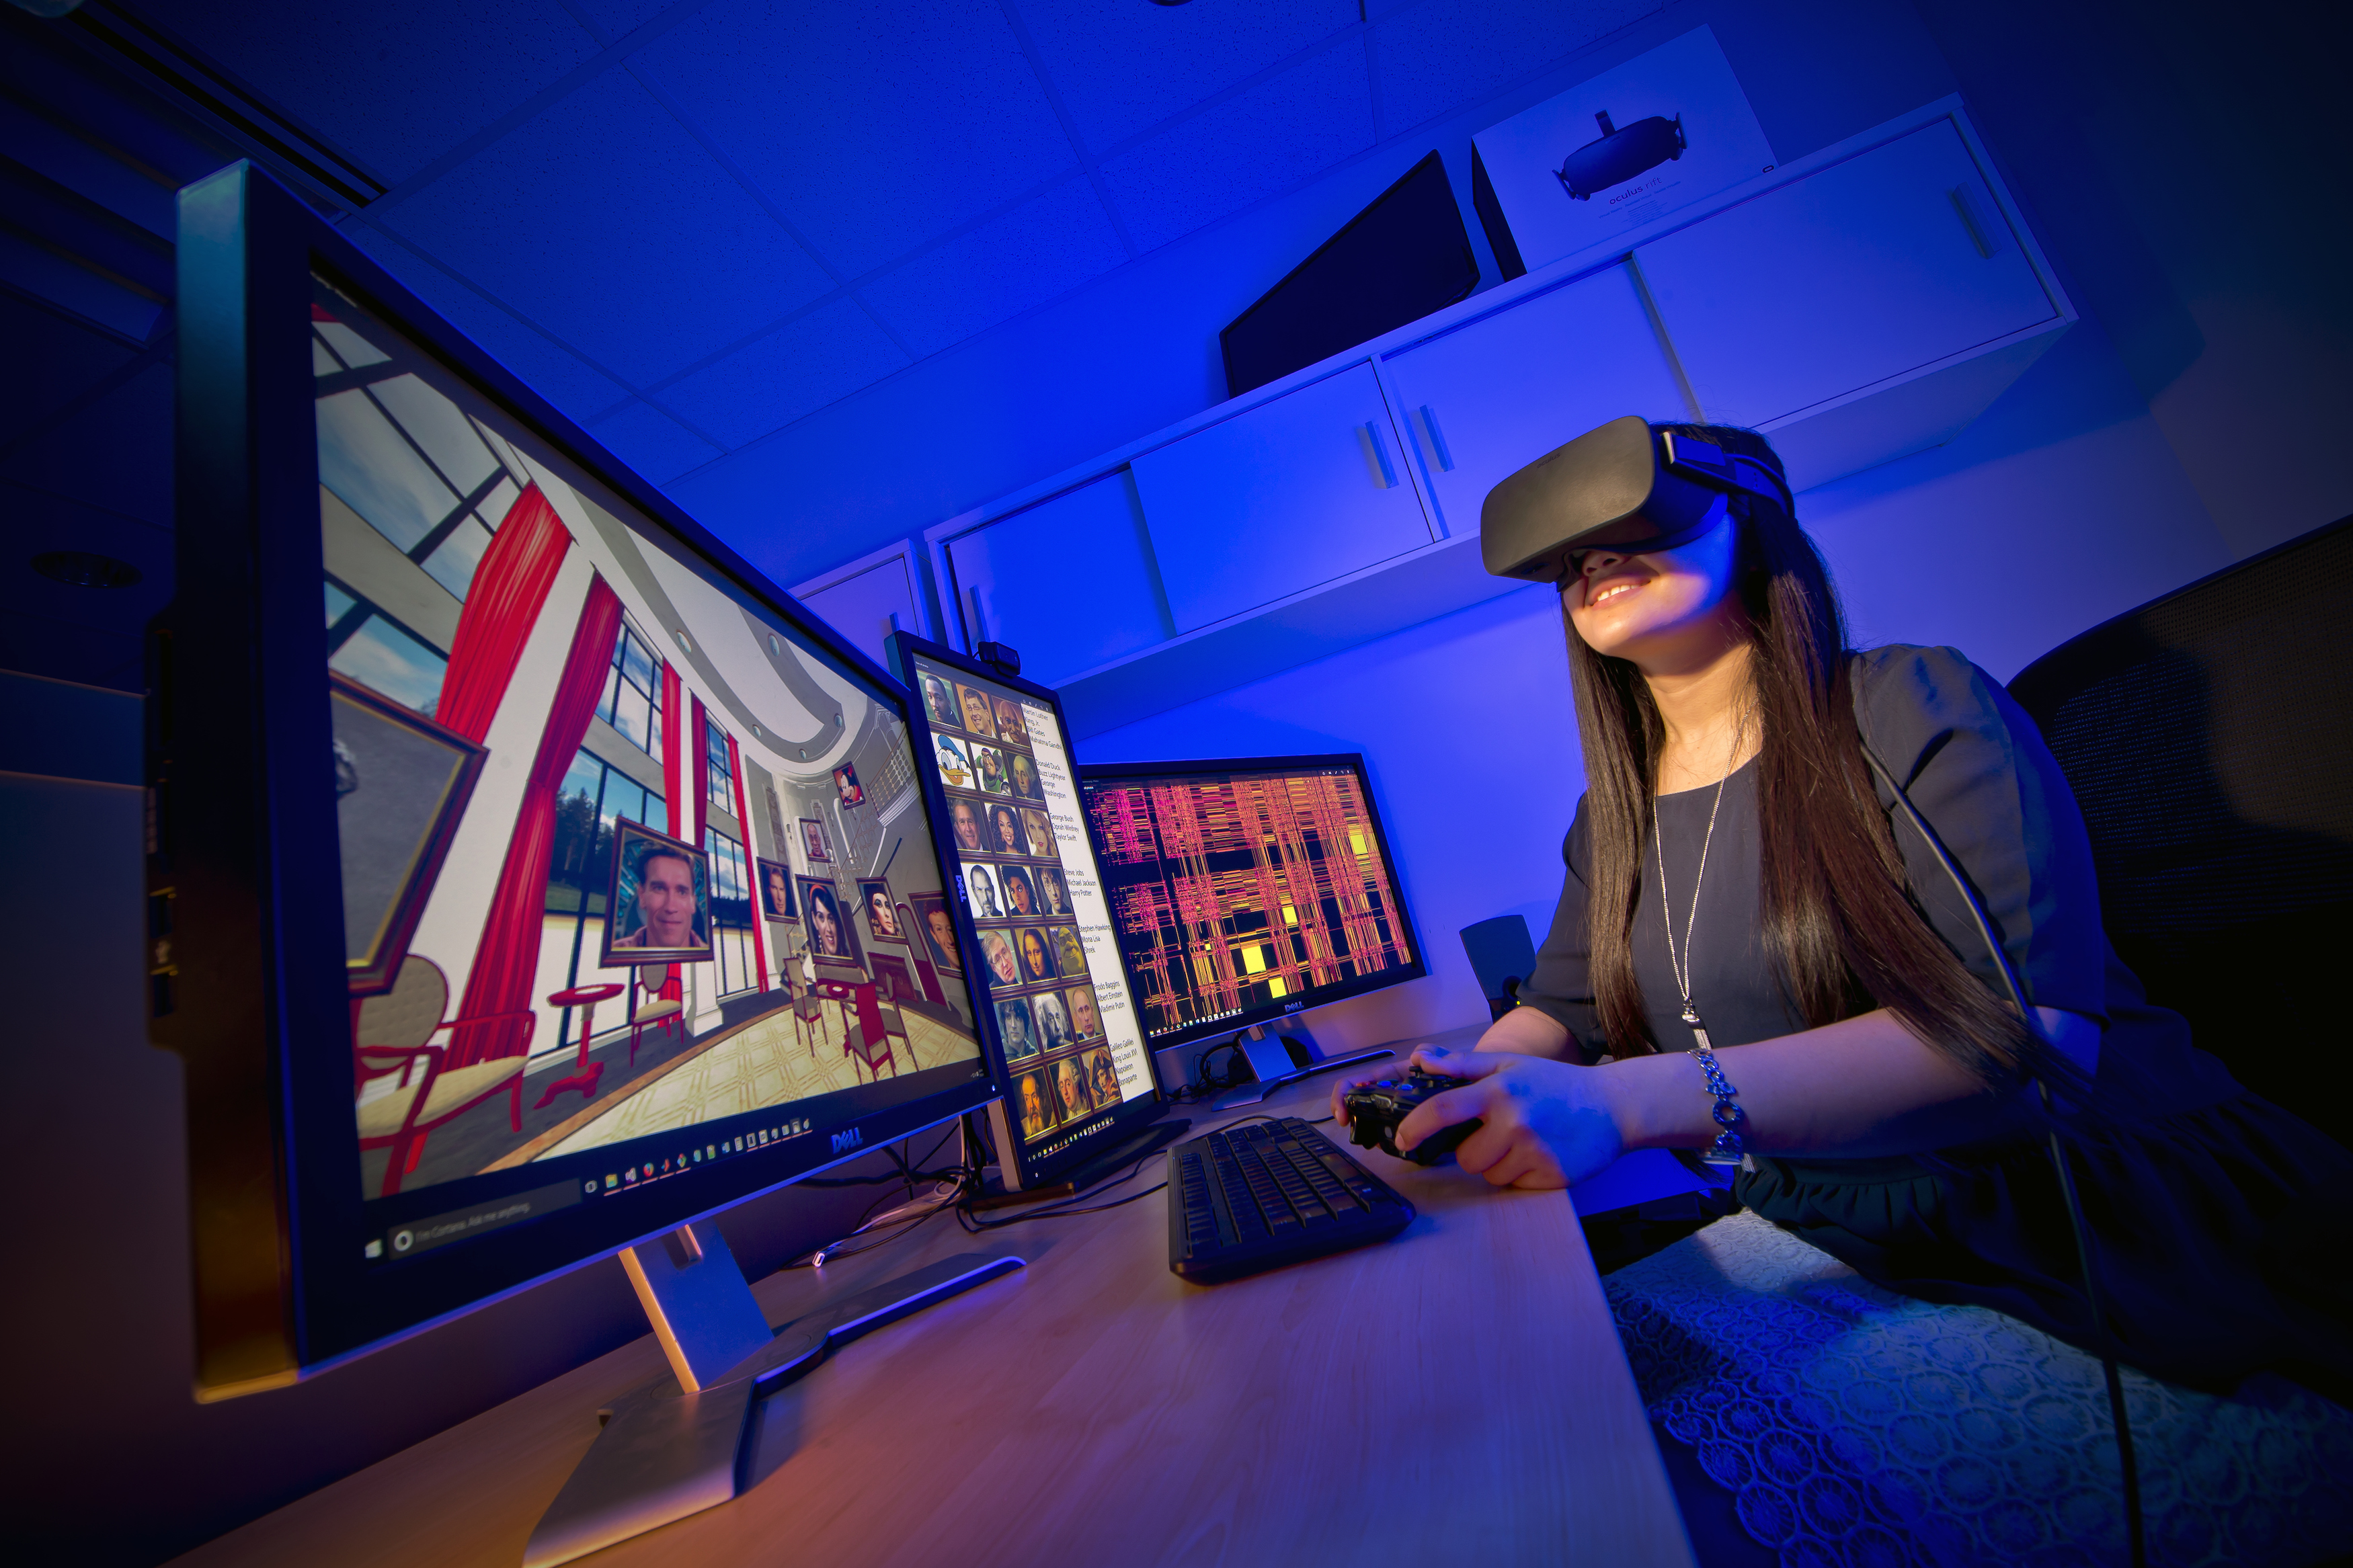 University of Maryland researchers conducted one of the first in-depth analyses on whether people recall information better through virtual reality, as opposed to desktop computers. Credit: John T. Consoli. Click image to download hi-res version.